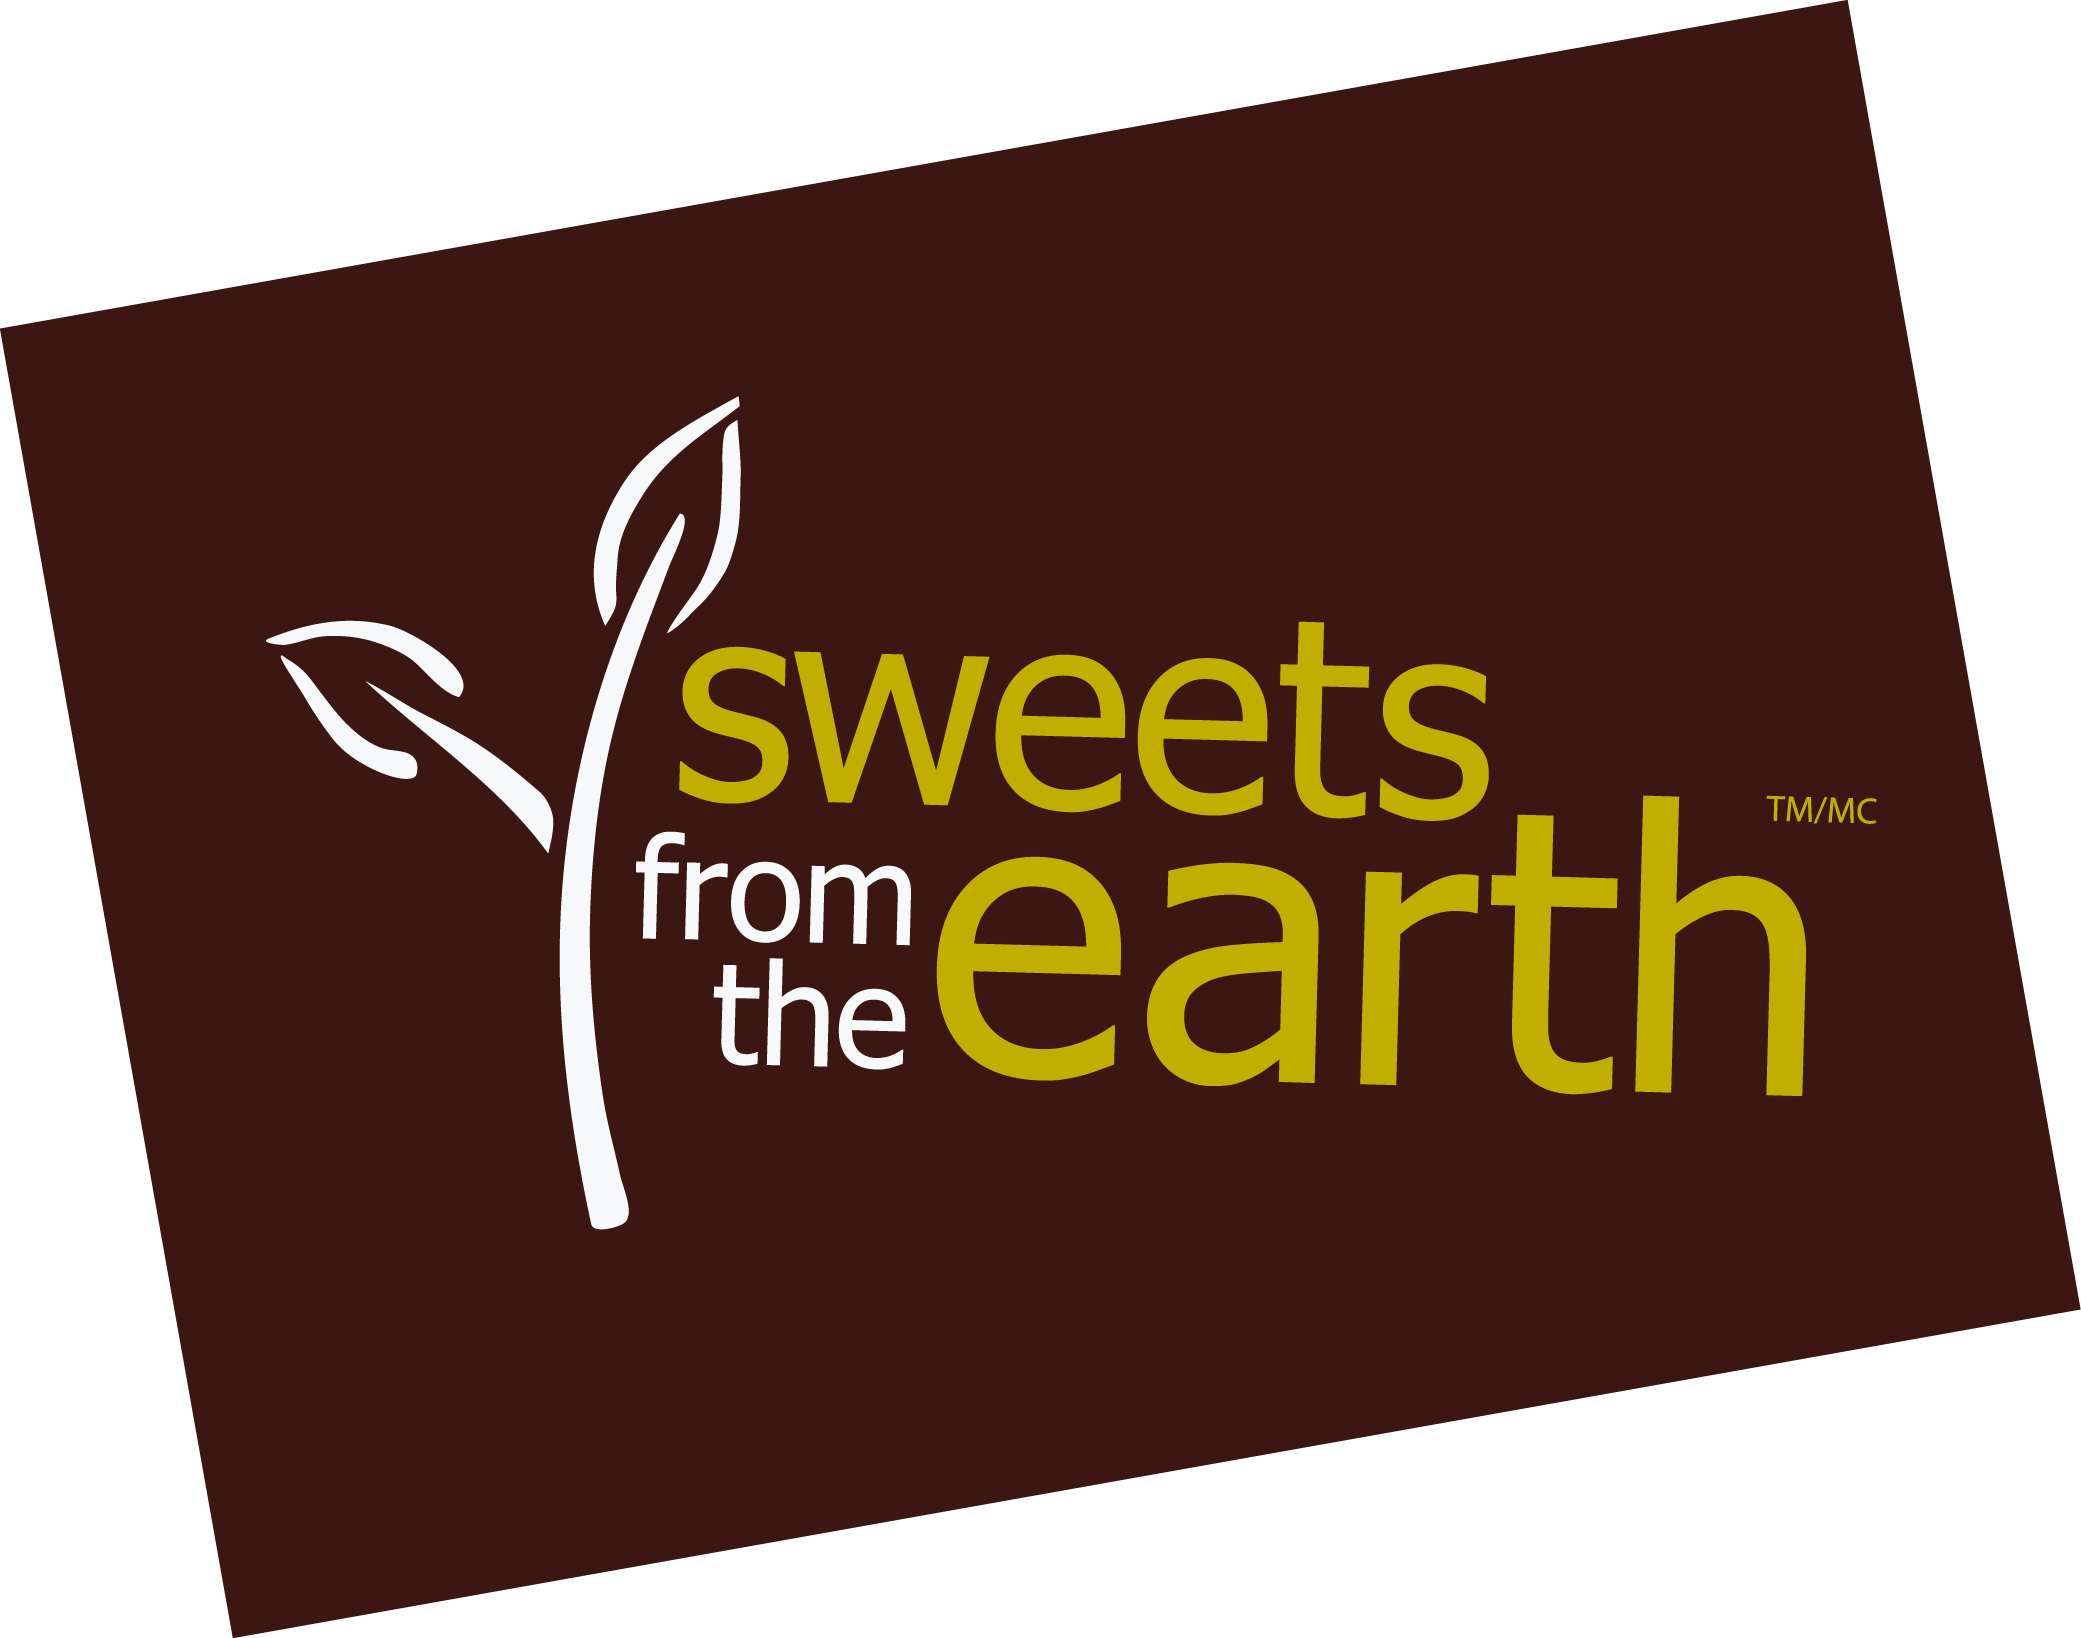 Sweets from the Earth